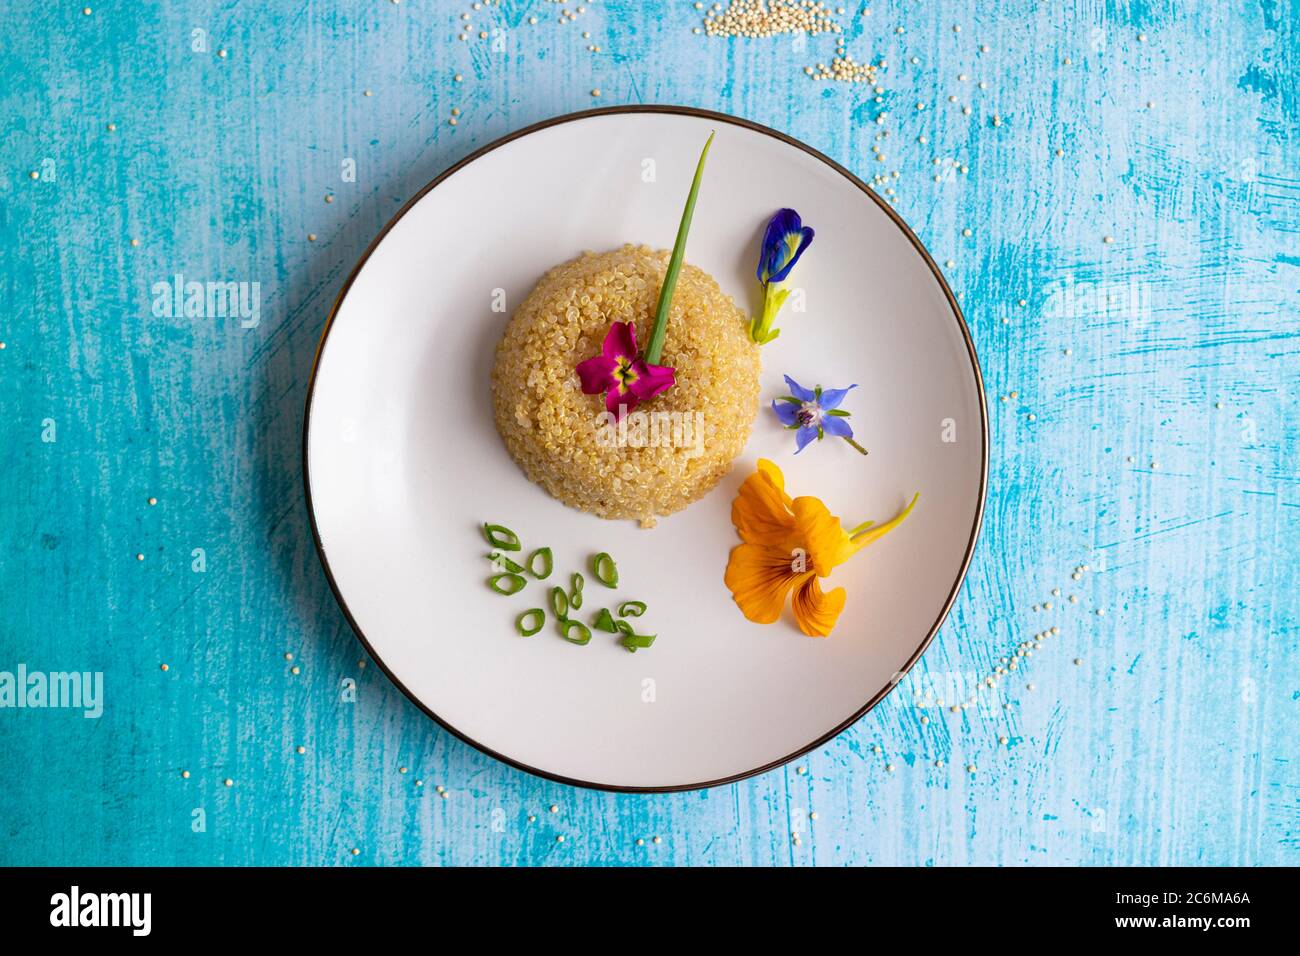 Quinoa plate presentation decorated with edible flowers Stock Photo